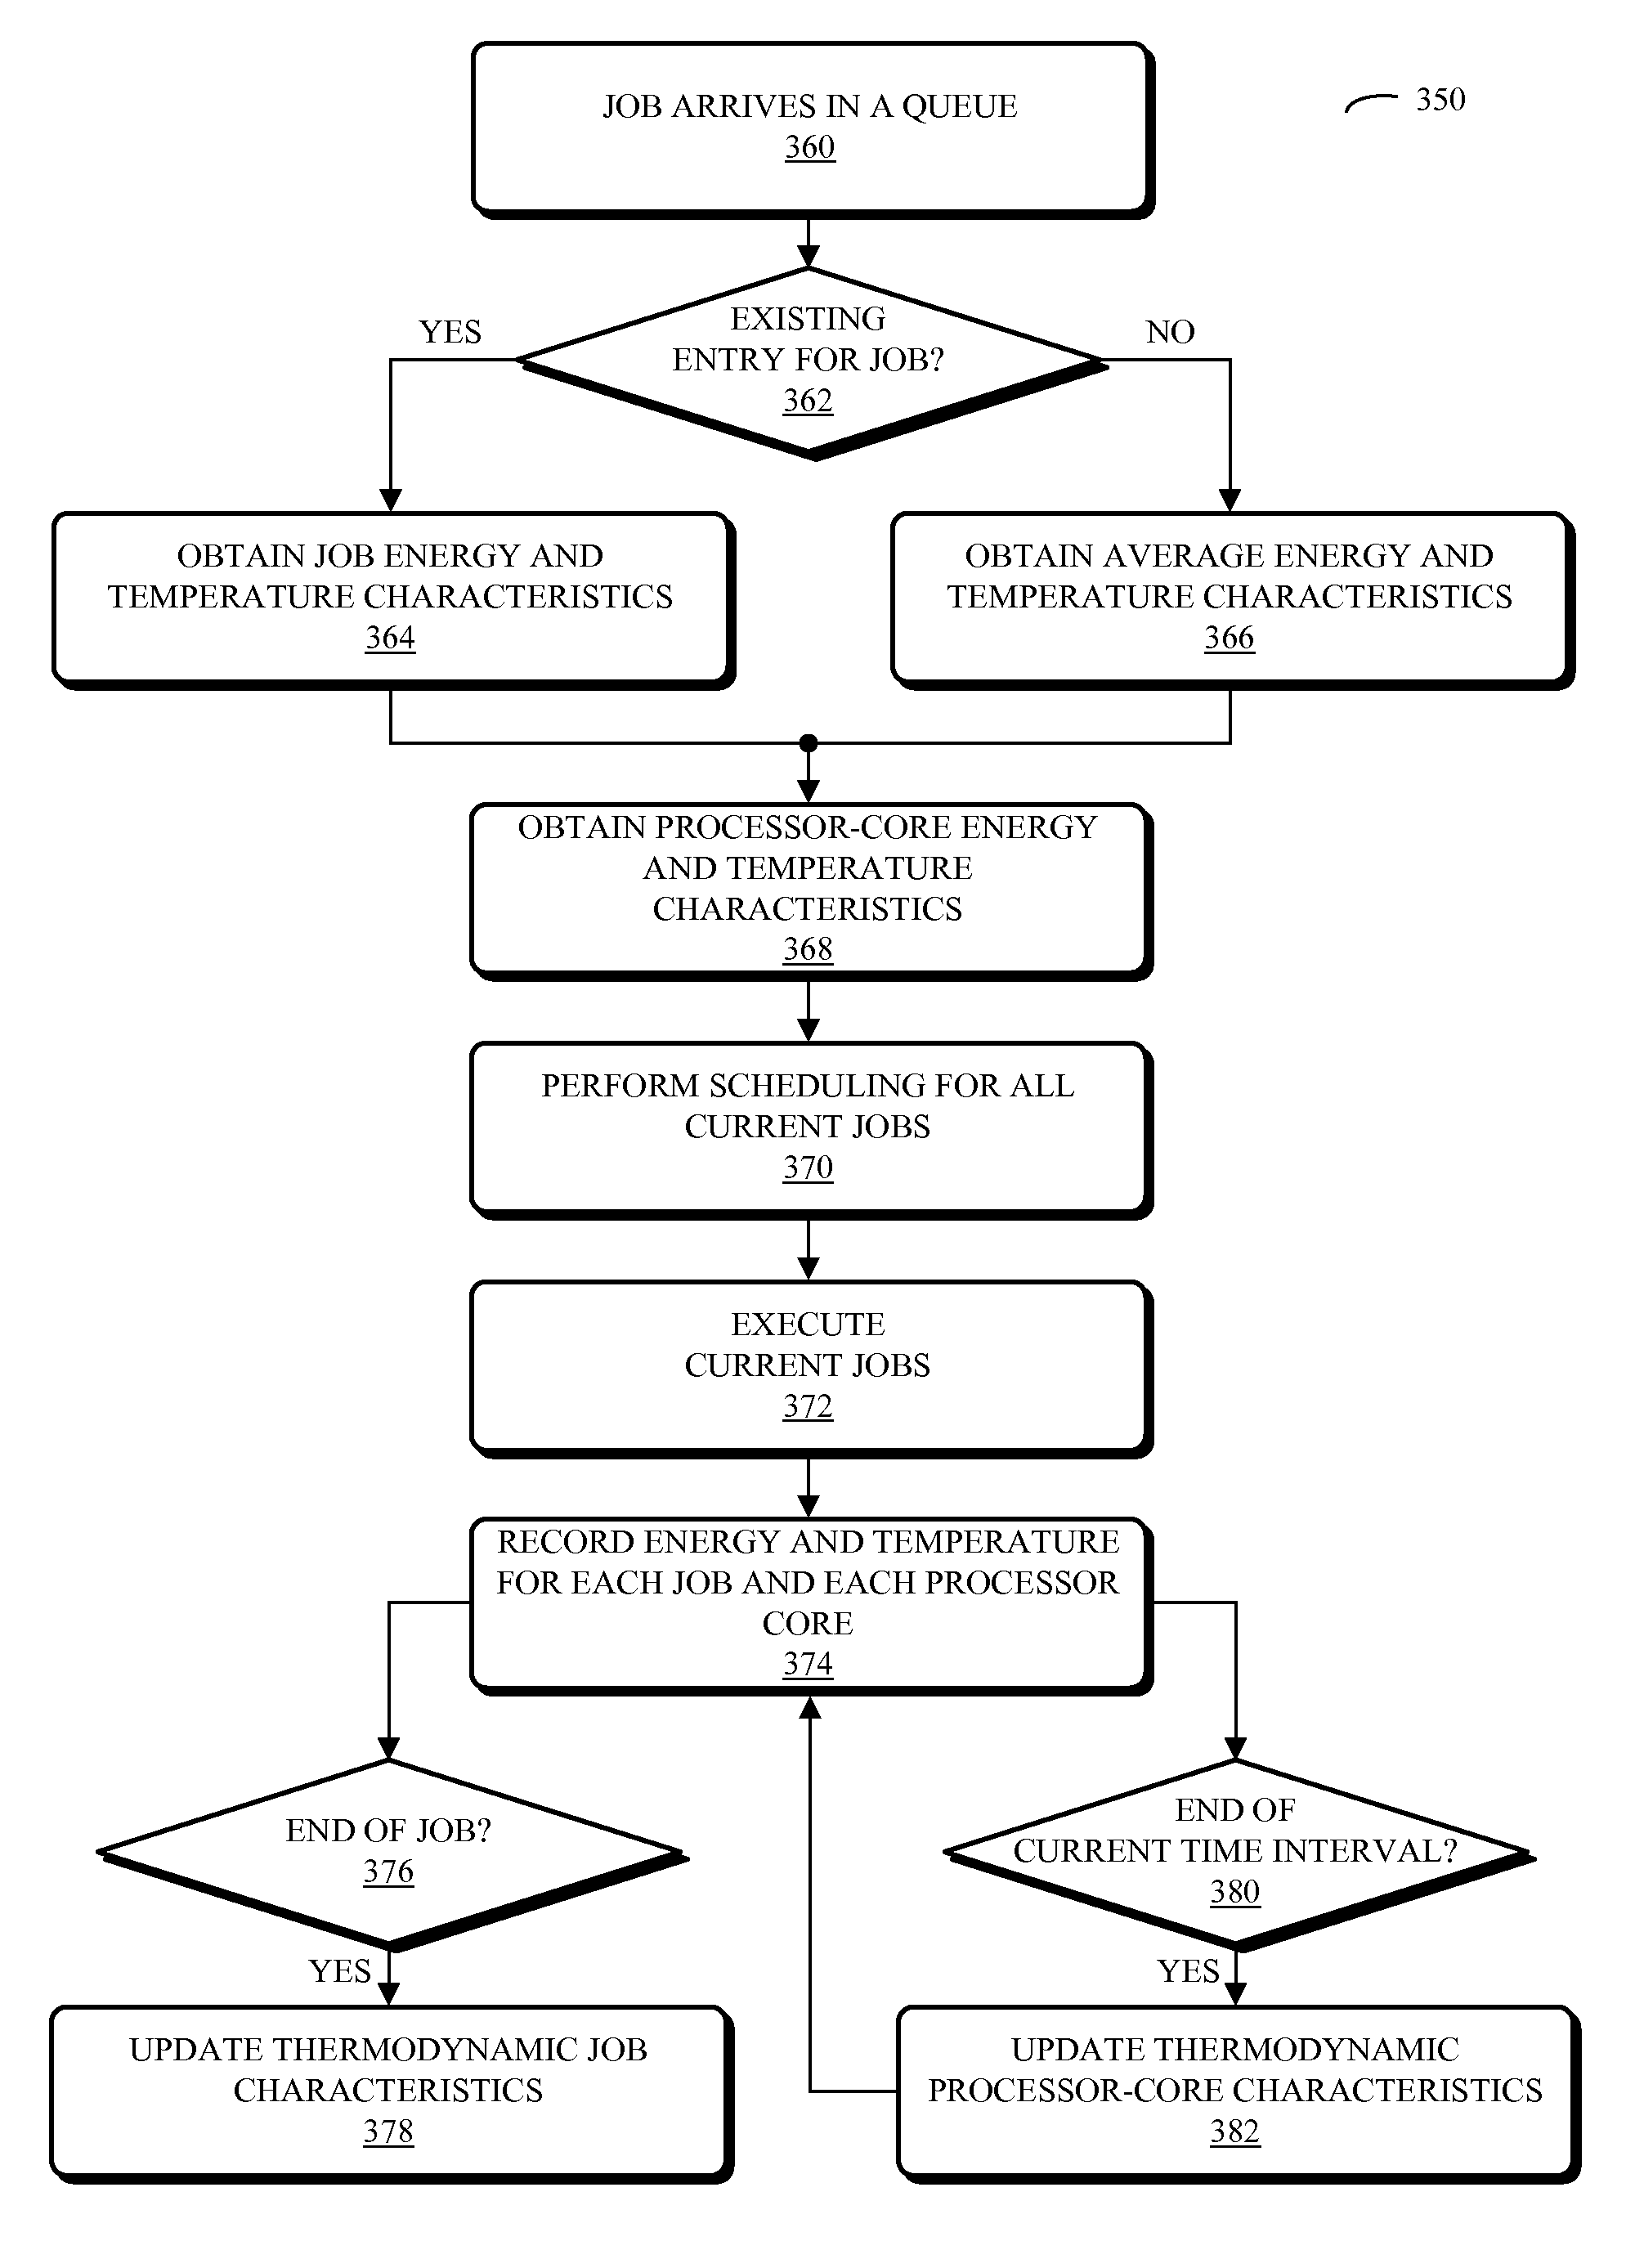 Temperature-aware and energy-aware scheduling in a computer system